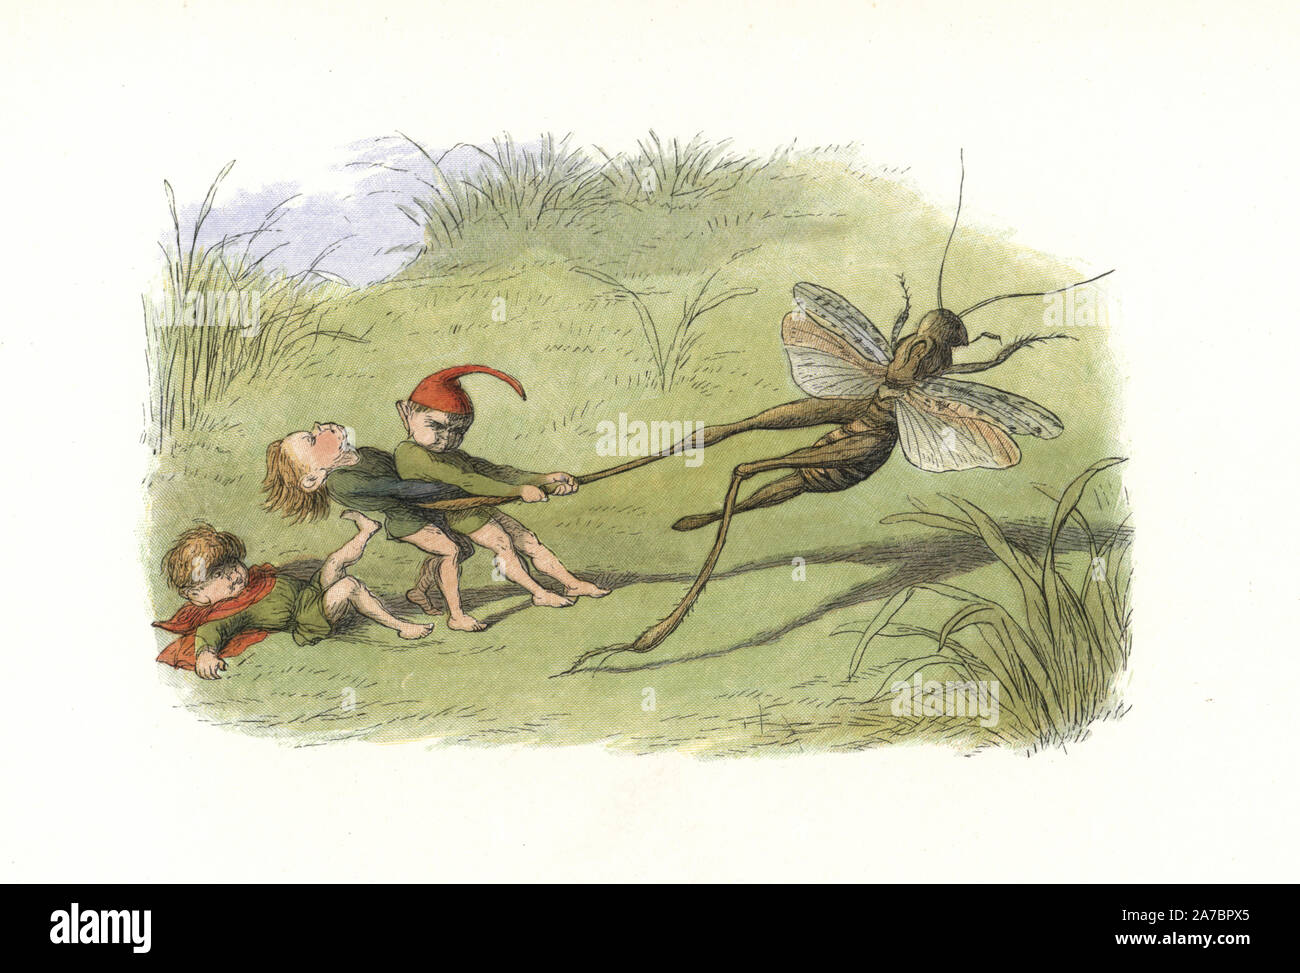 Cruel elves holding on to a cricket's leg. Handcoloured woodblock print by Edmund Evans after an illustration by Richard Doyle from In Fairyland, a series of Pictures from the Elf World, Longman, London, 1870. Stock Photo